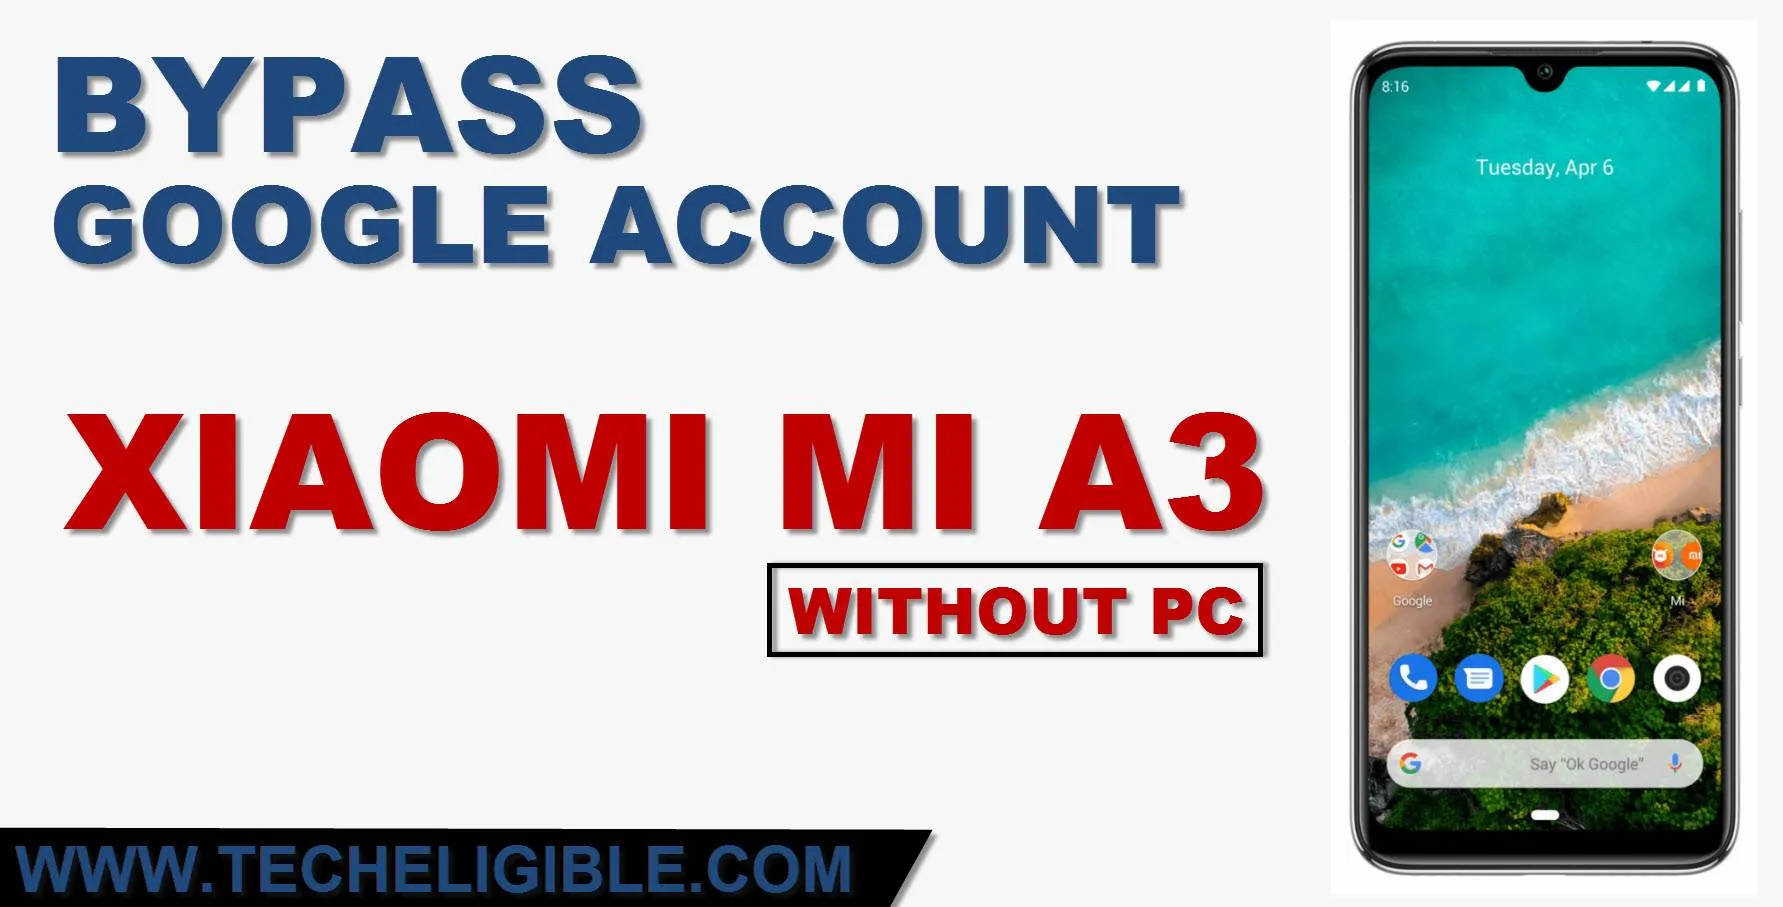 Remove FRP and Bypass Google Account Xiaomi Mi A3 [NO PC]